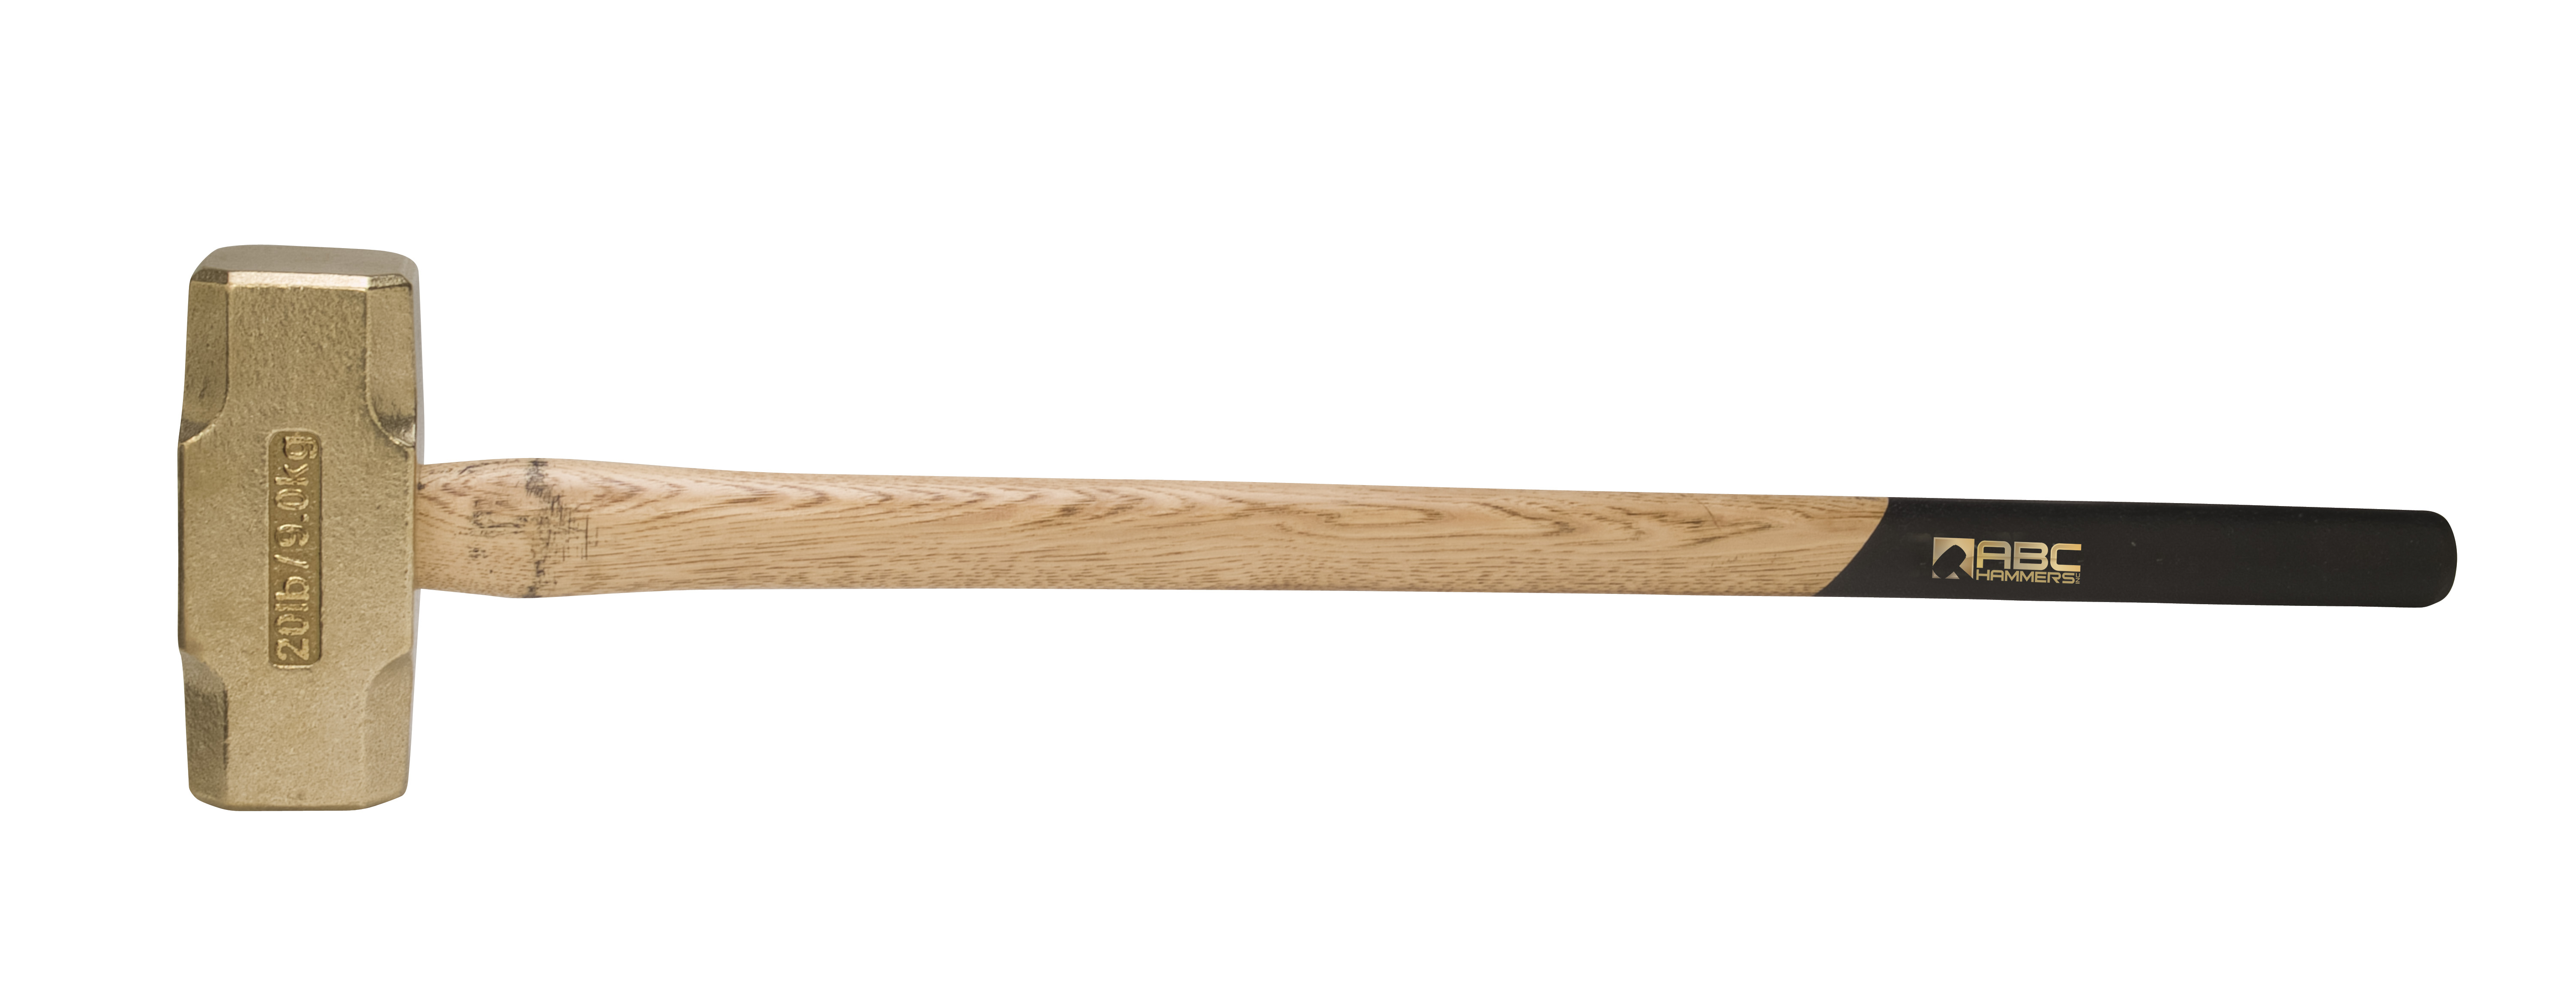 20 lb. Brass Hammer with 32" Wood Handle